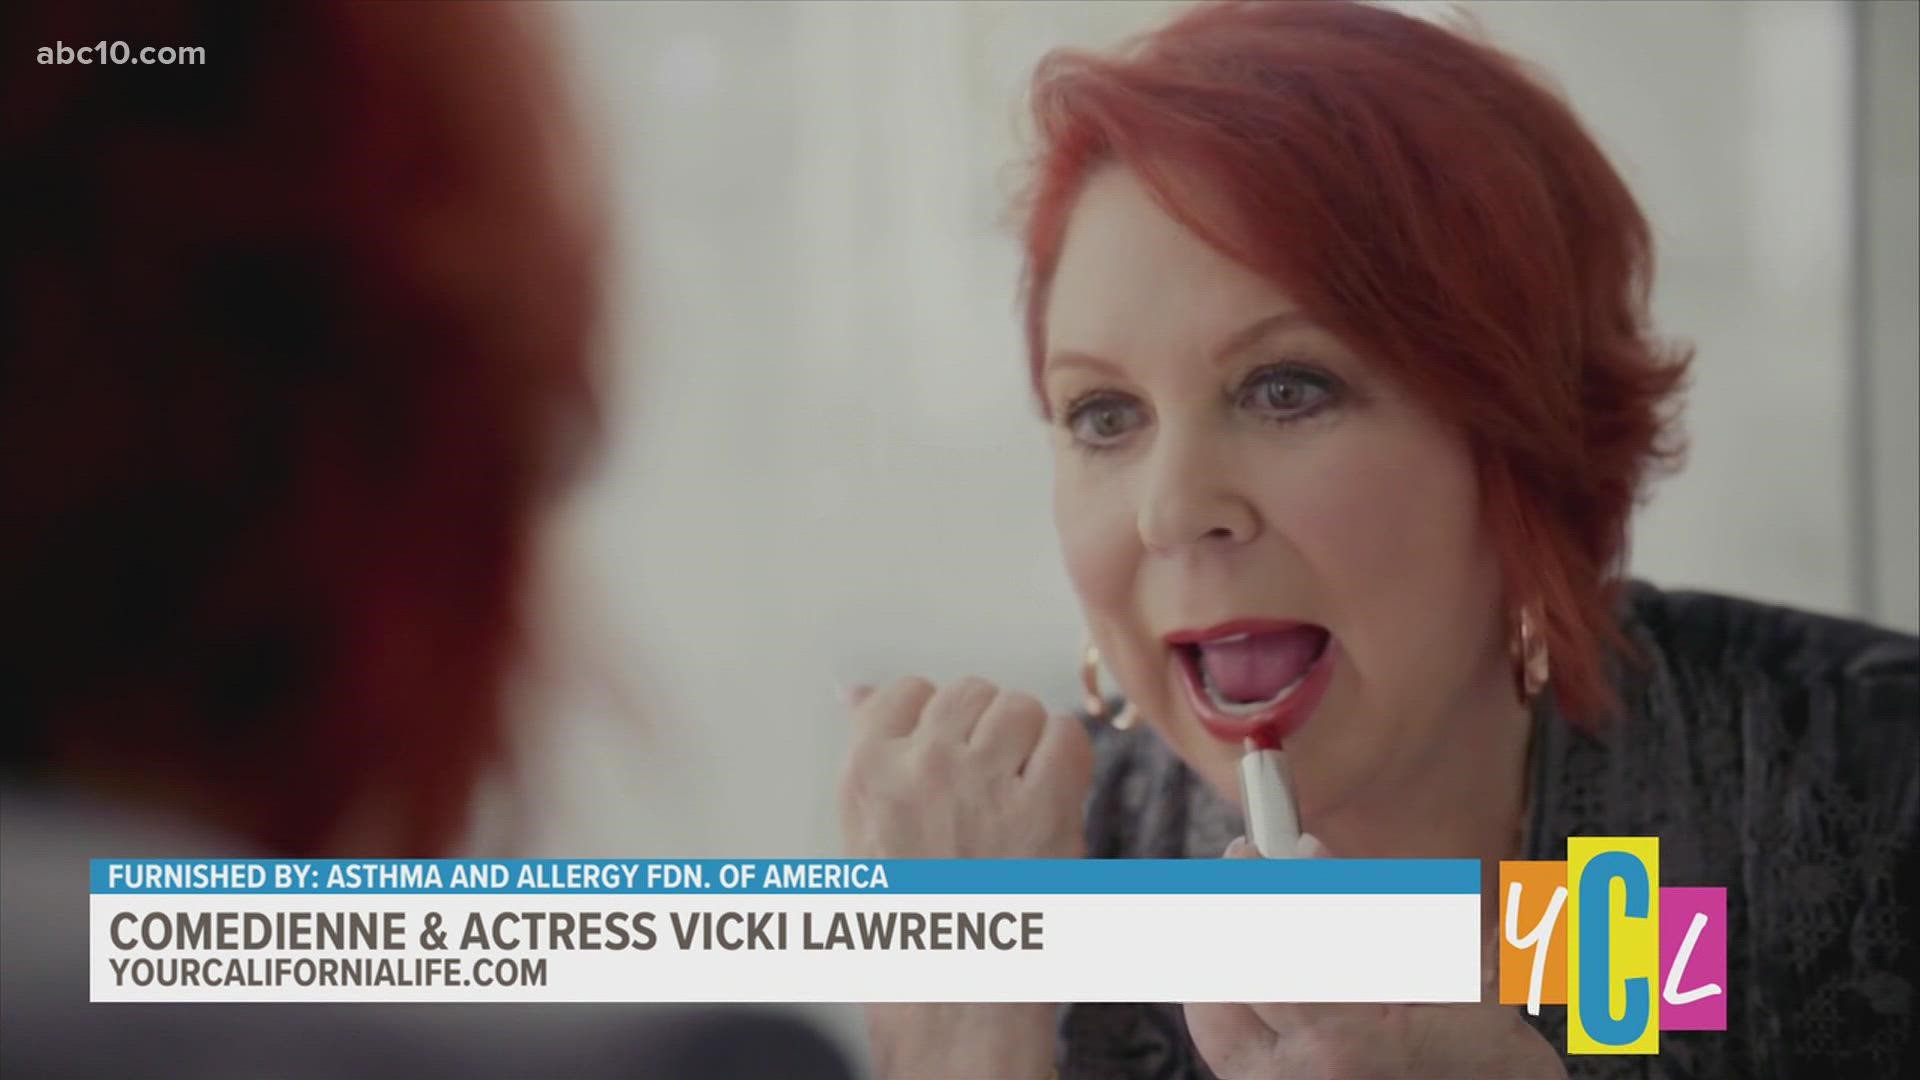 Many recognize Vicki Lawrence for her comedic talents from her TV days with Carol Burnett. Now she is lending her name to raise awareness about a health condition.